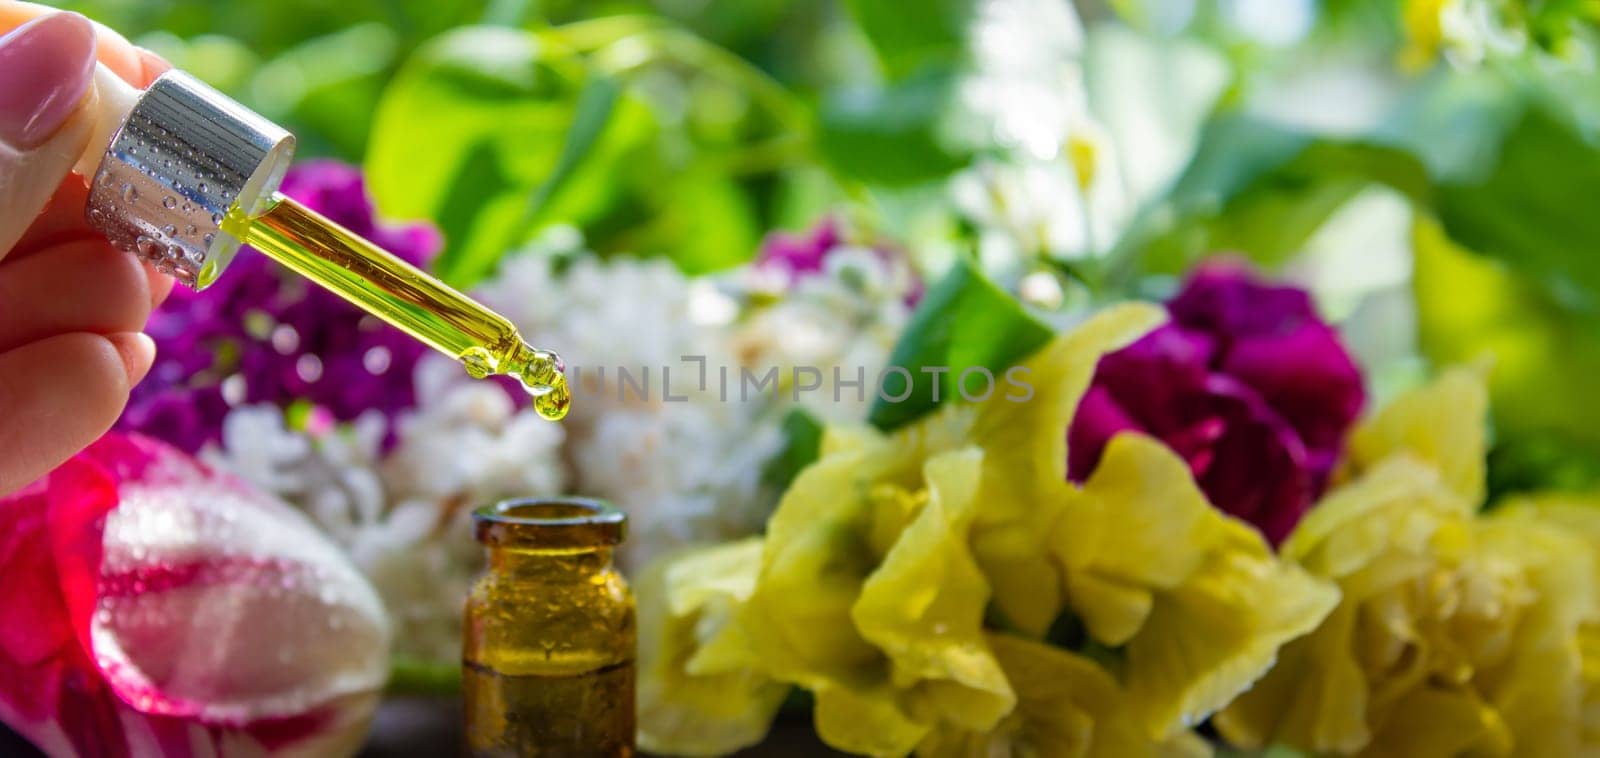 essential oil of flowers drips into a jar. selective focus. nature